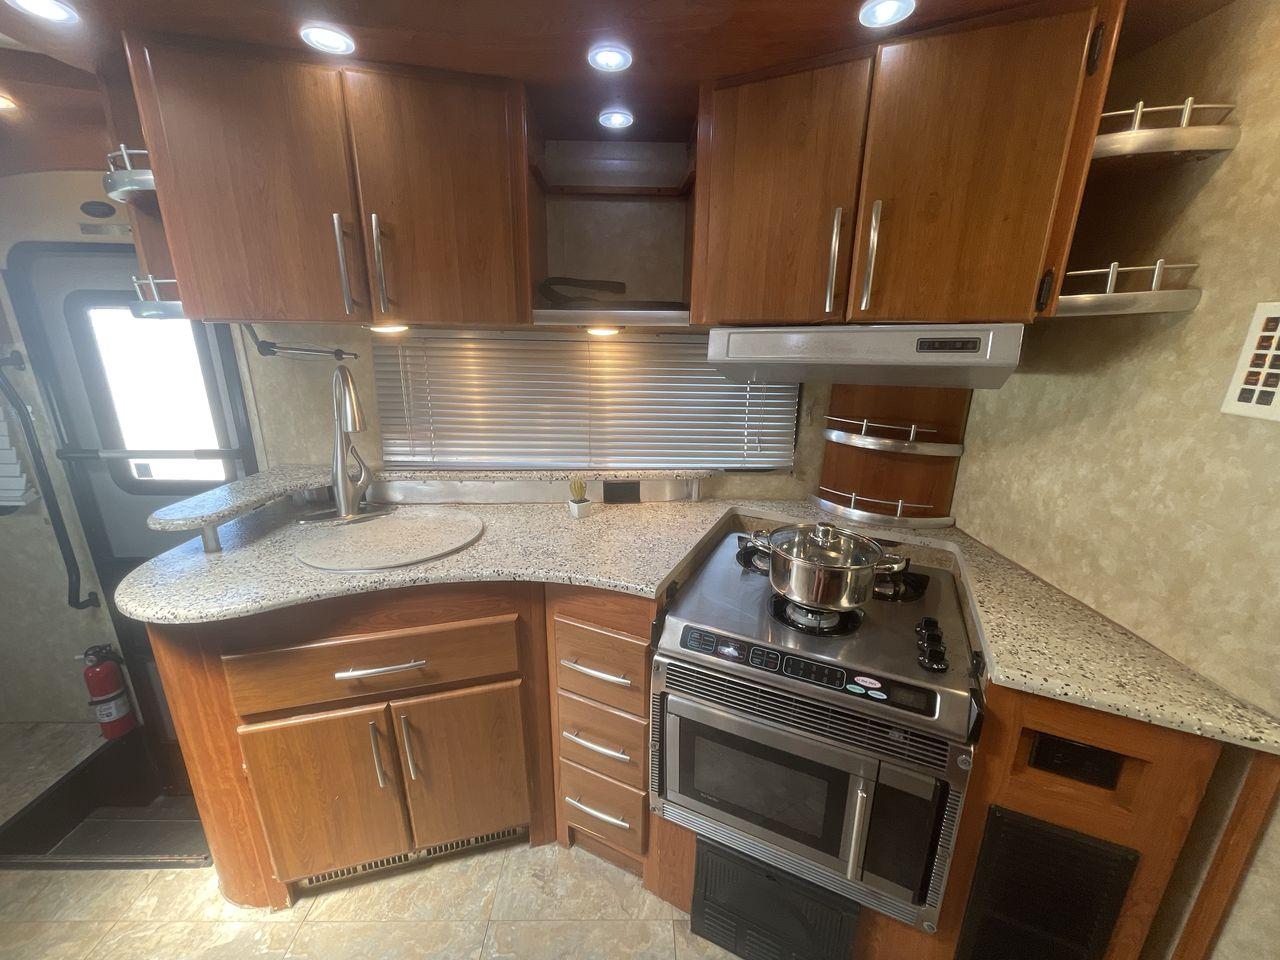 2008 TAN COACHMEN LEPRECHAUN 320DS E-450 (1FDXE45S08D) with an 6.8L V10 SOHC 20V engine, Length: 31.5 ft. | Dry Weight: 12,555 lbs. | Gross Weight: 14,500 lbs. | Slides: 2 transmission, located at 4319 N Main St, Cleburne, TX, 76033, (817) 678-5133, 32.385960, -97.391212 - Photo #9